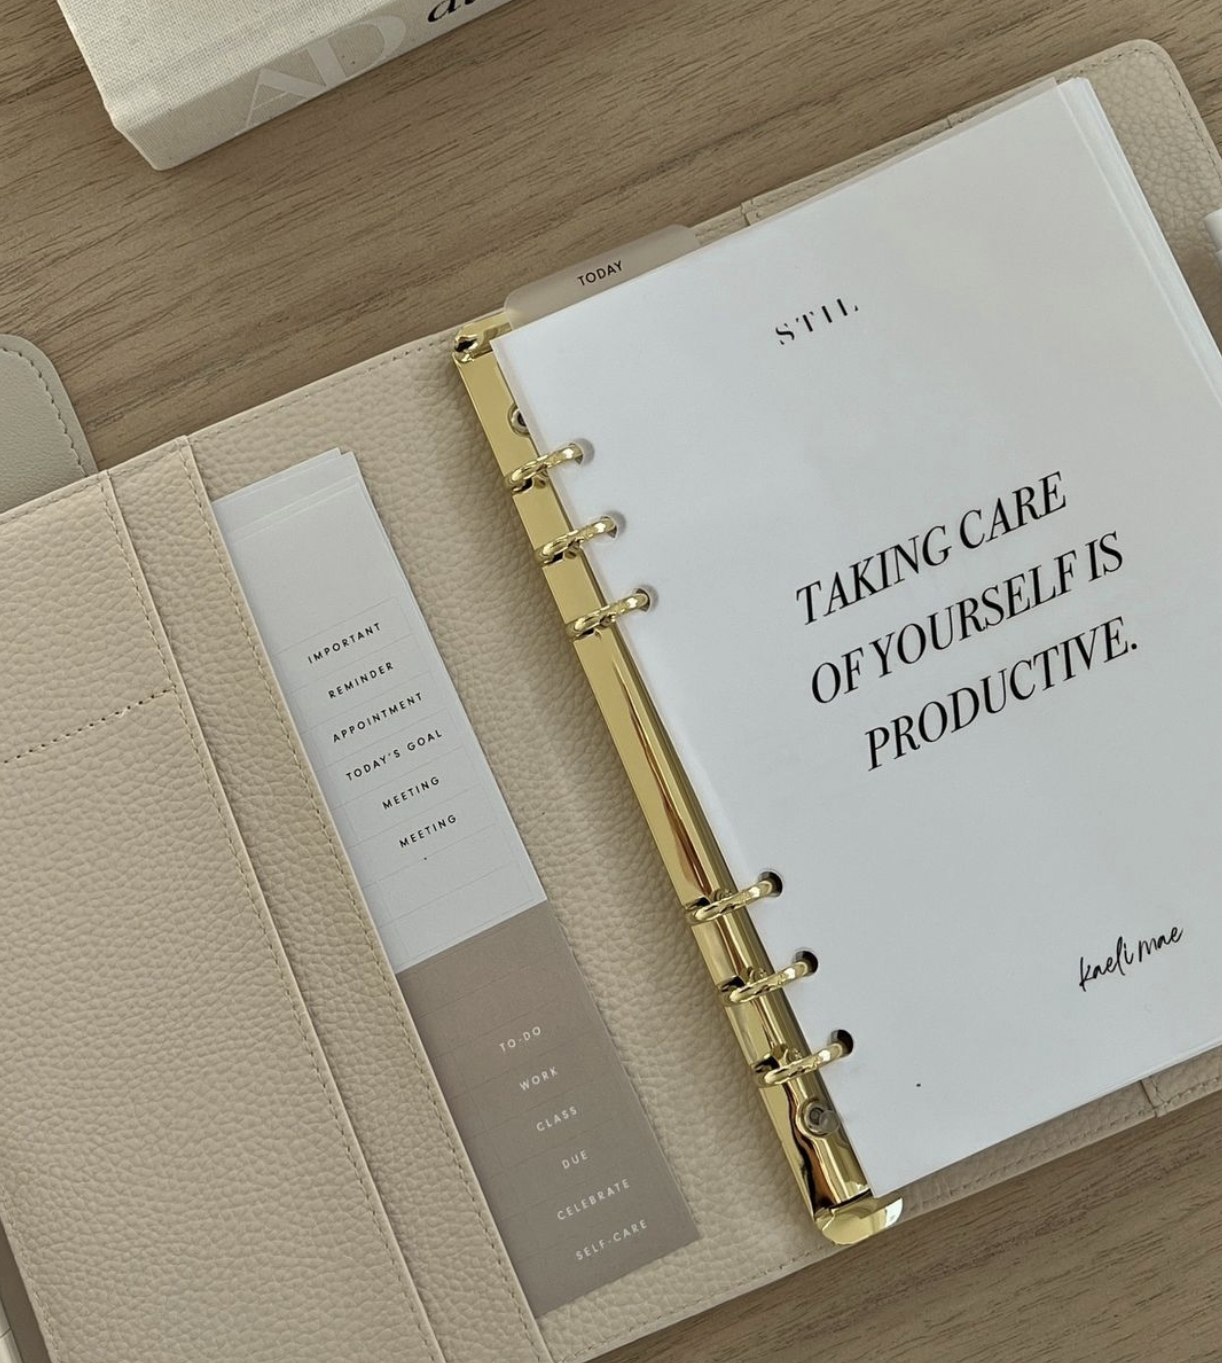 A leather-bound planner opens to the first page which reads: &quot;TAKING CARE OF YOURSELF IS PRODUCTIVE.&quot;